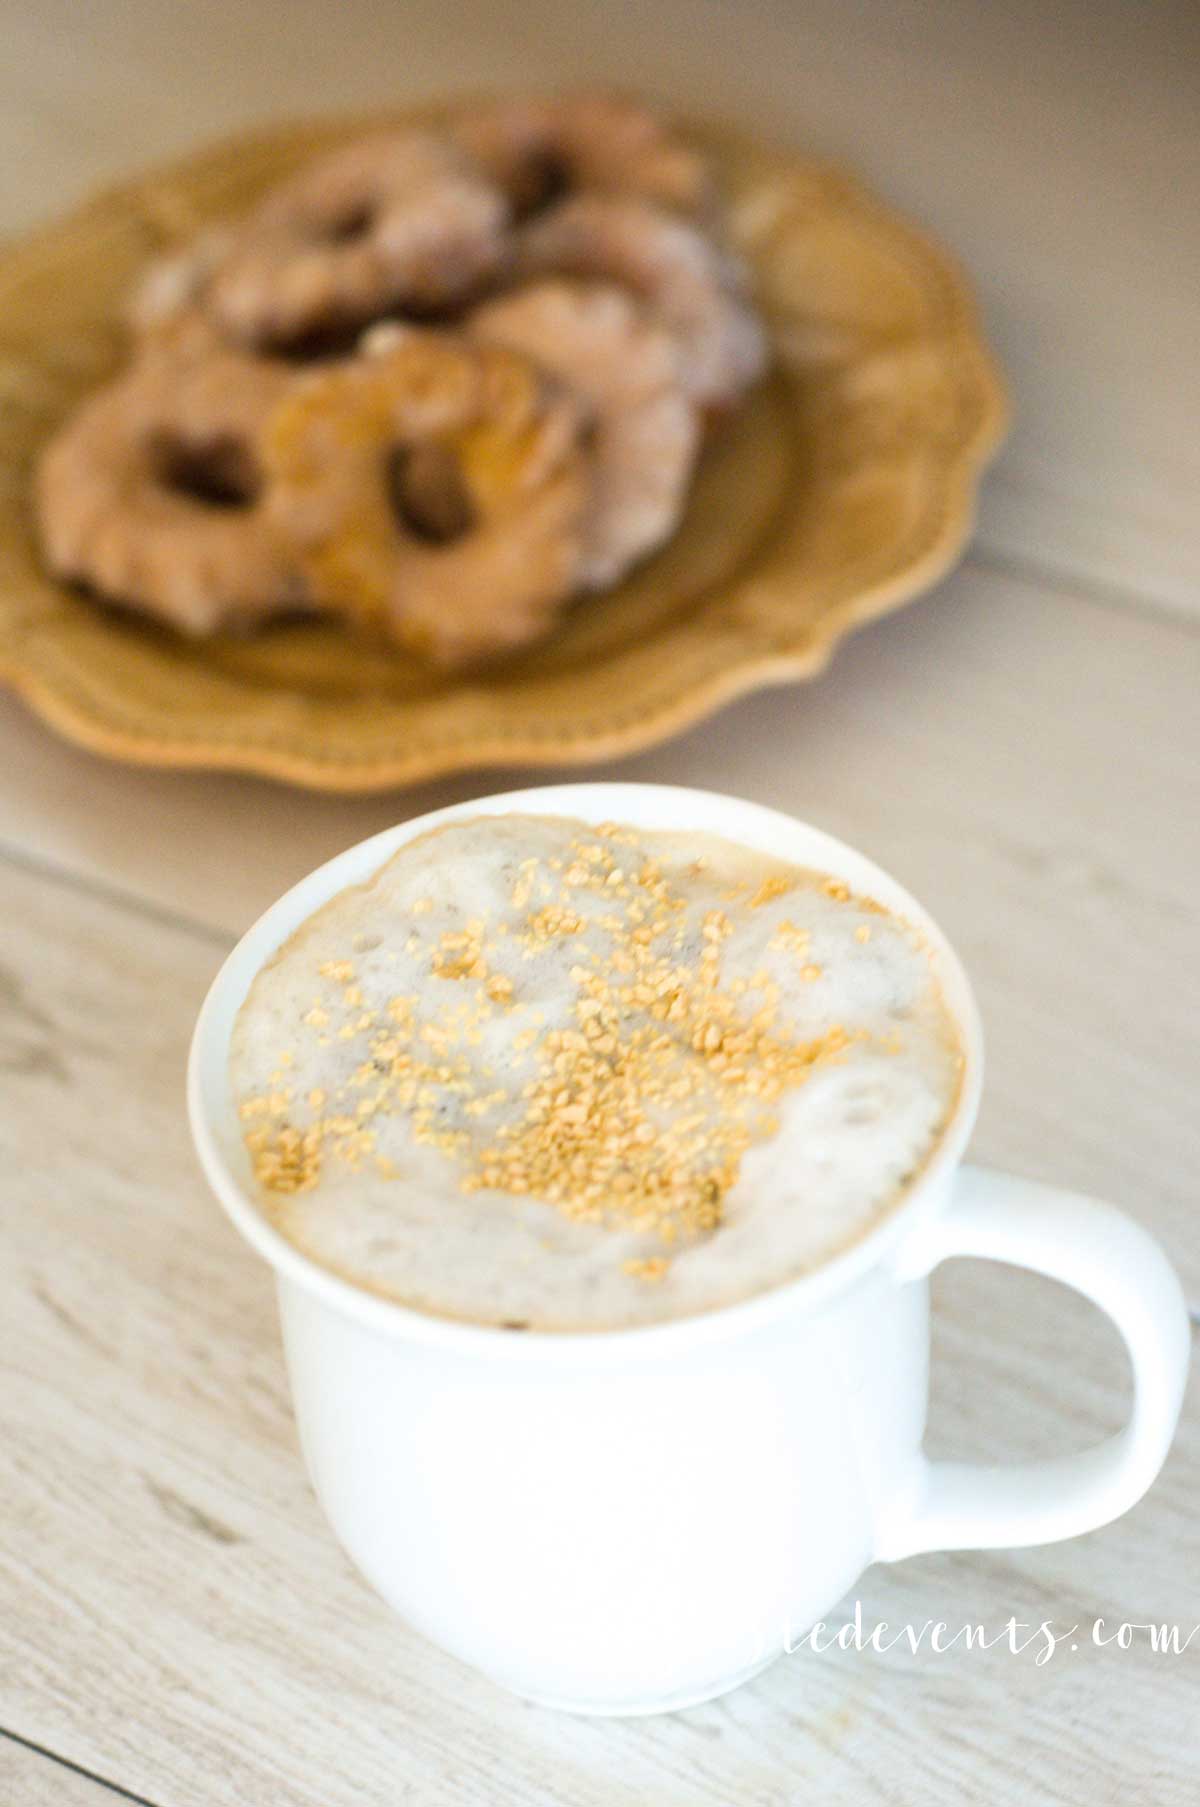 Coffee Drink Recipes for Fall - Fall flavor inspirations via Misty Nelson frostedMoms frostedevents.com @frostedevents